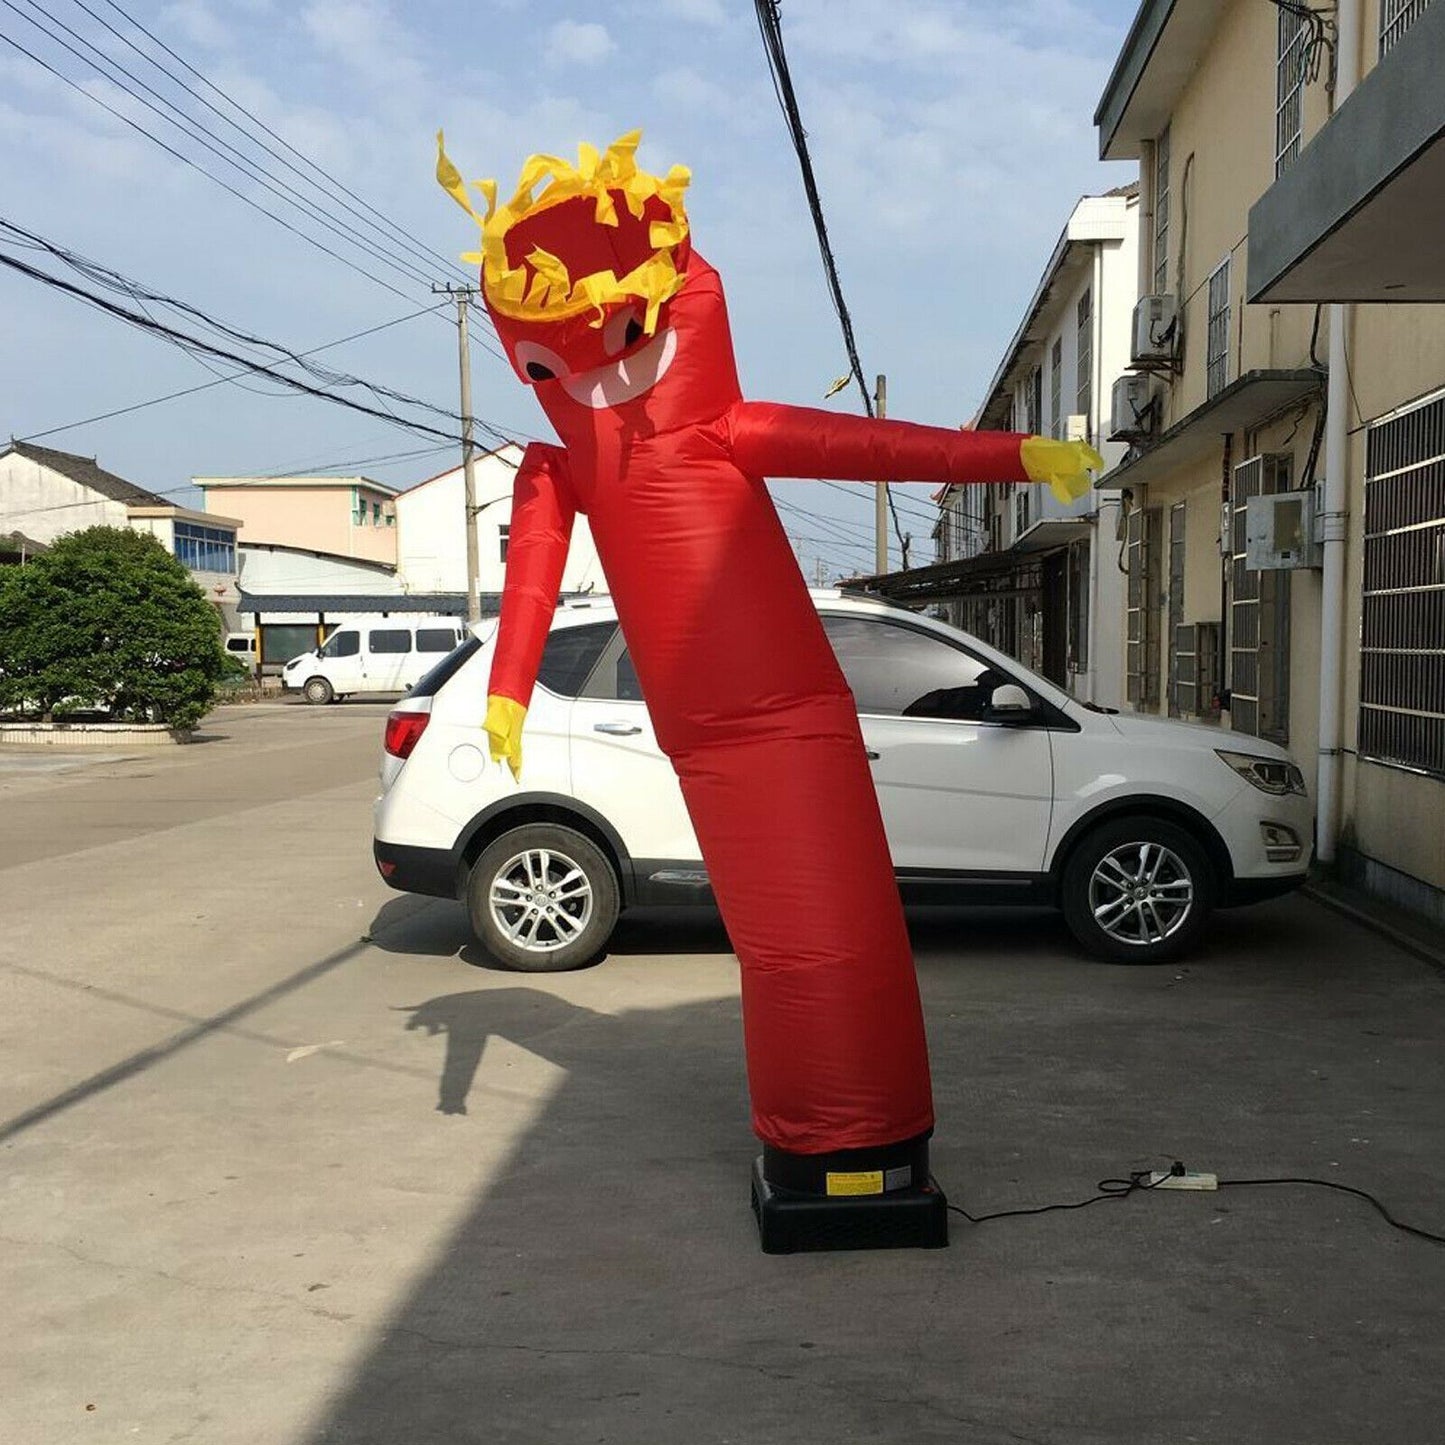 Inflatable Wacky Wavy Arm Flailing Air Dancer Tube Man 10 Ft - Westfield Retailers